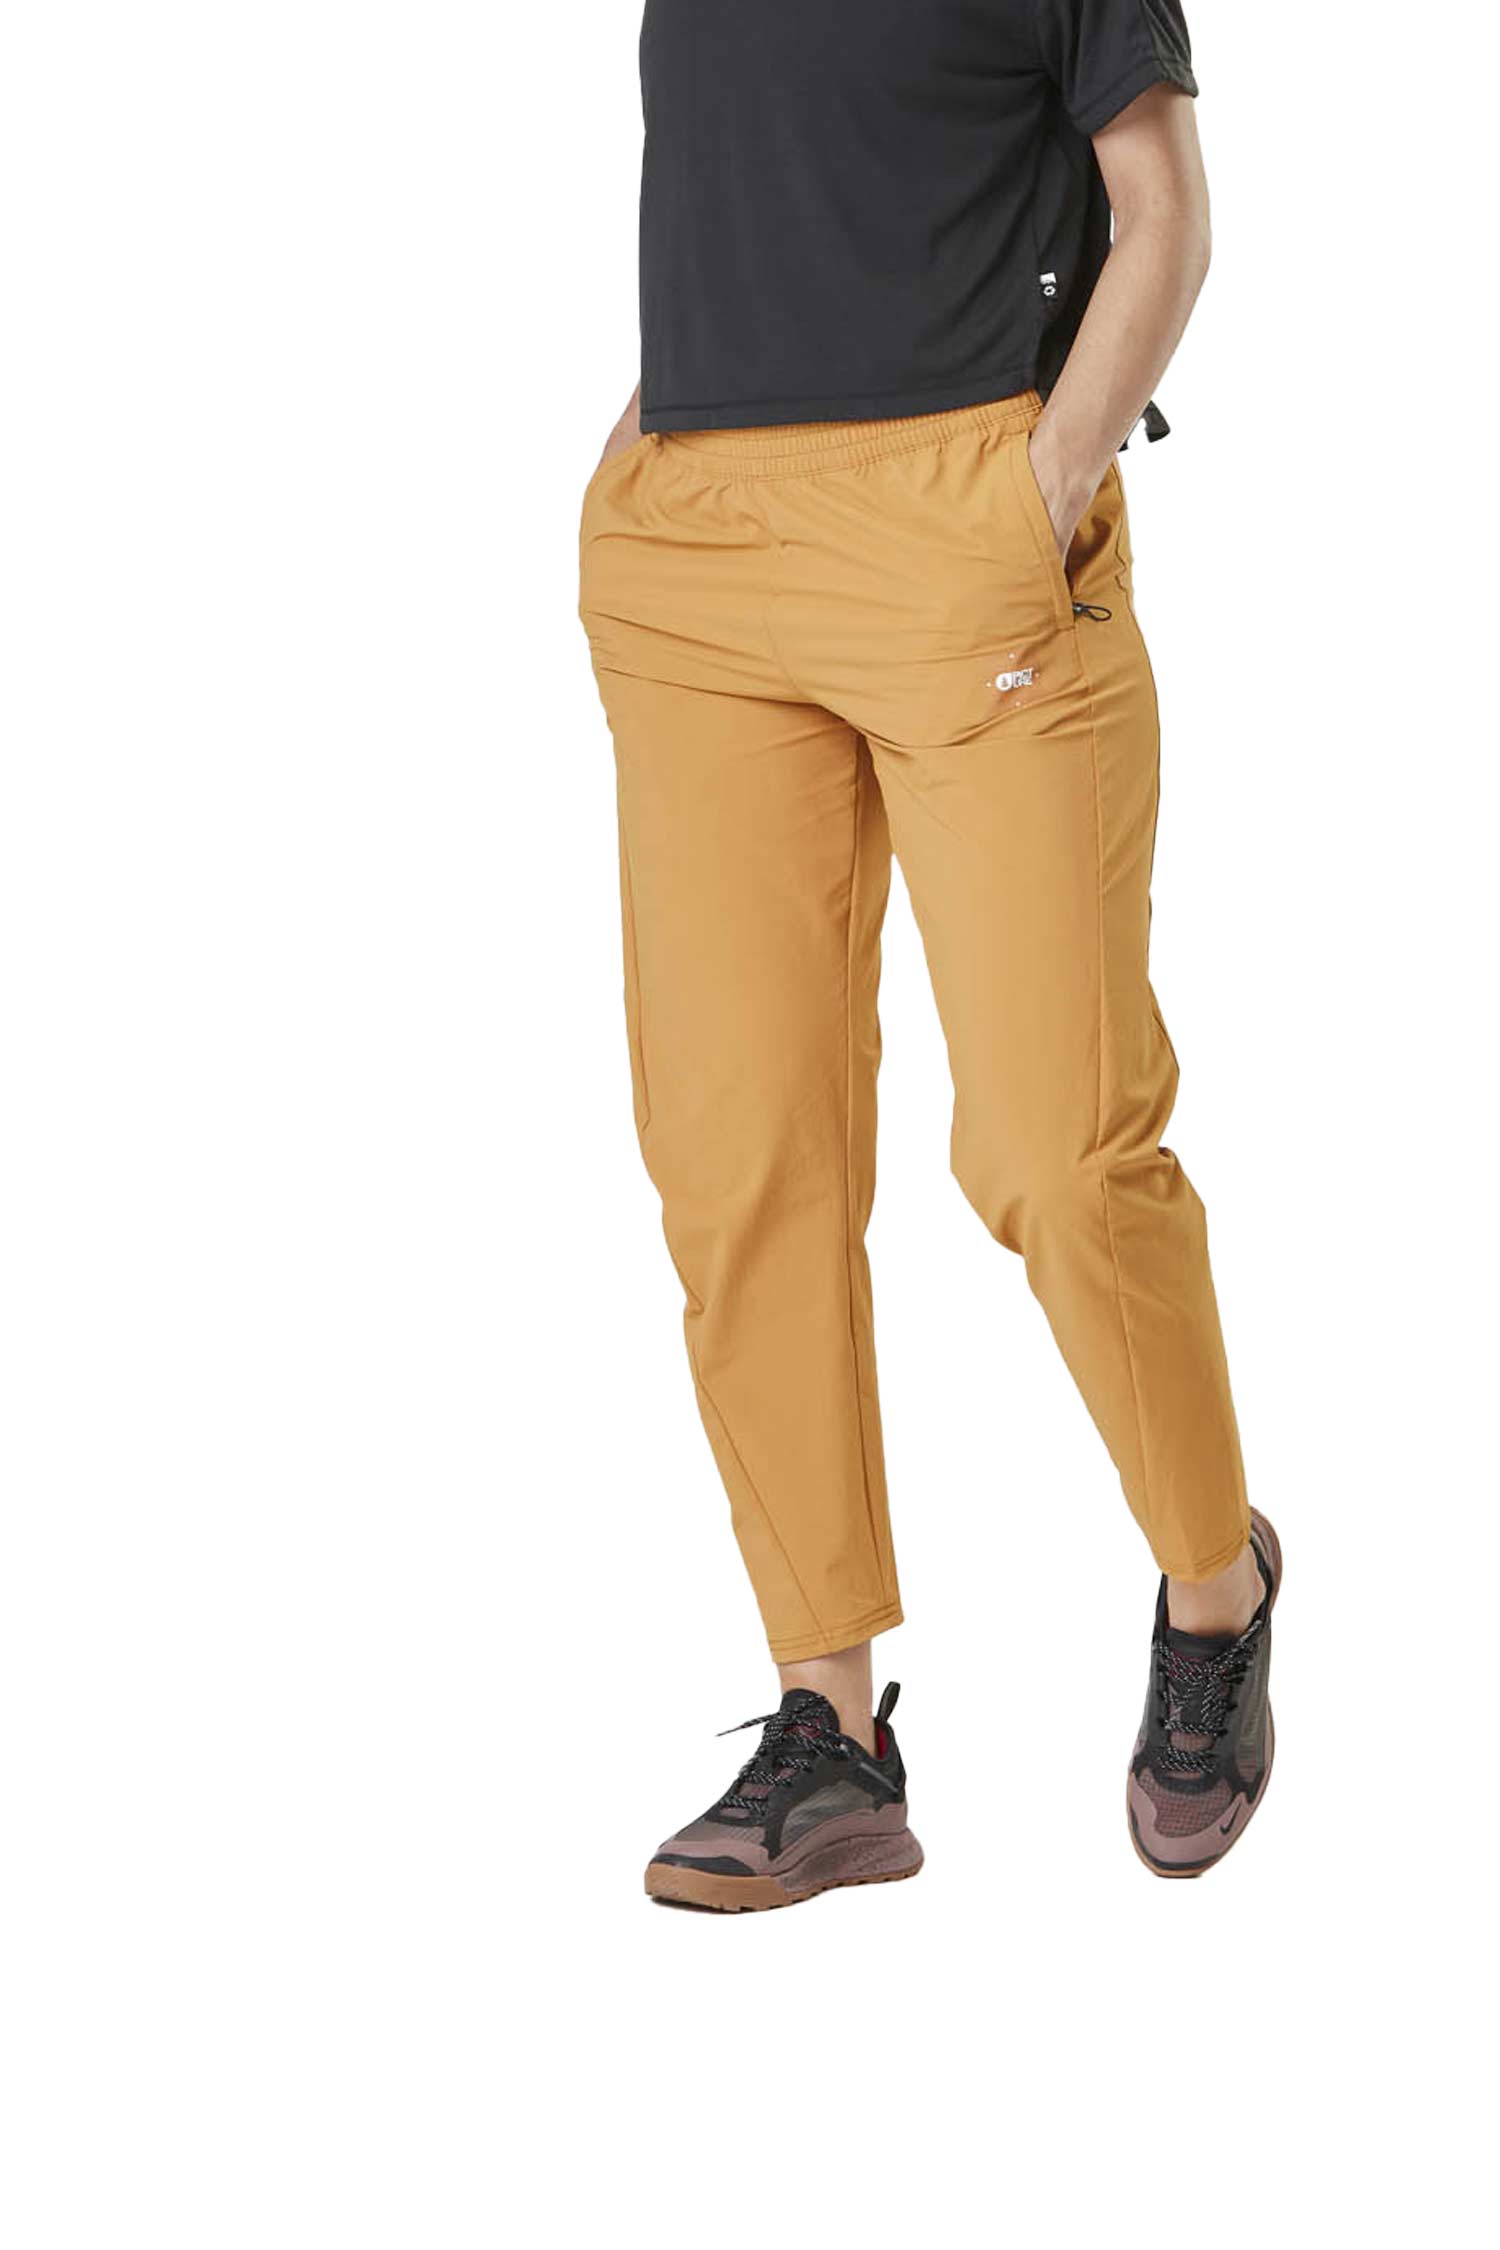 Picture Tulee Stretch Cashew Women's Hiking Pants